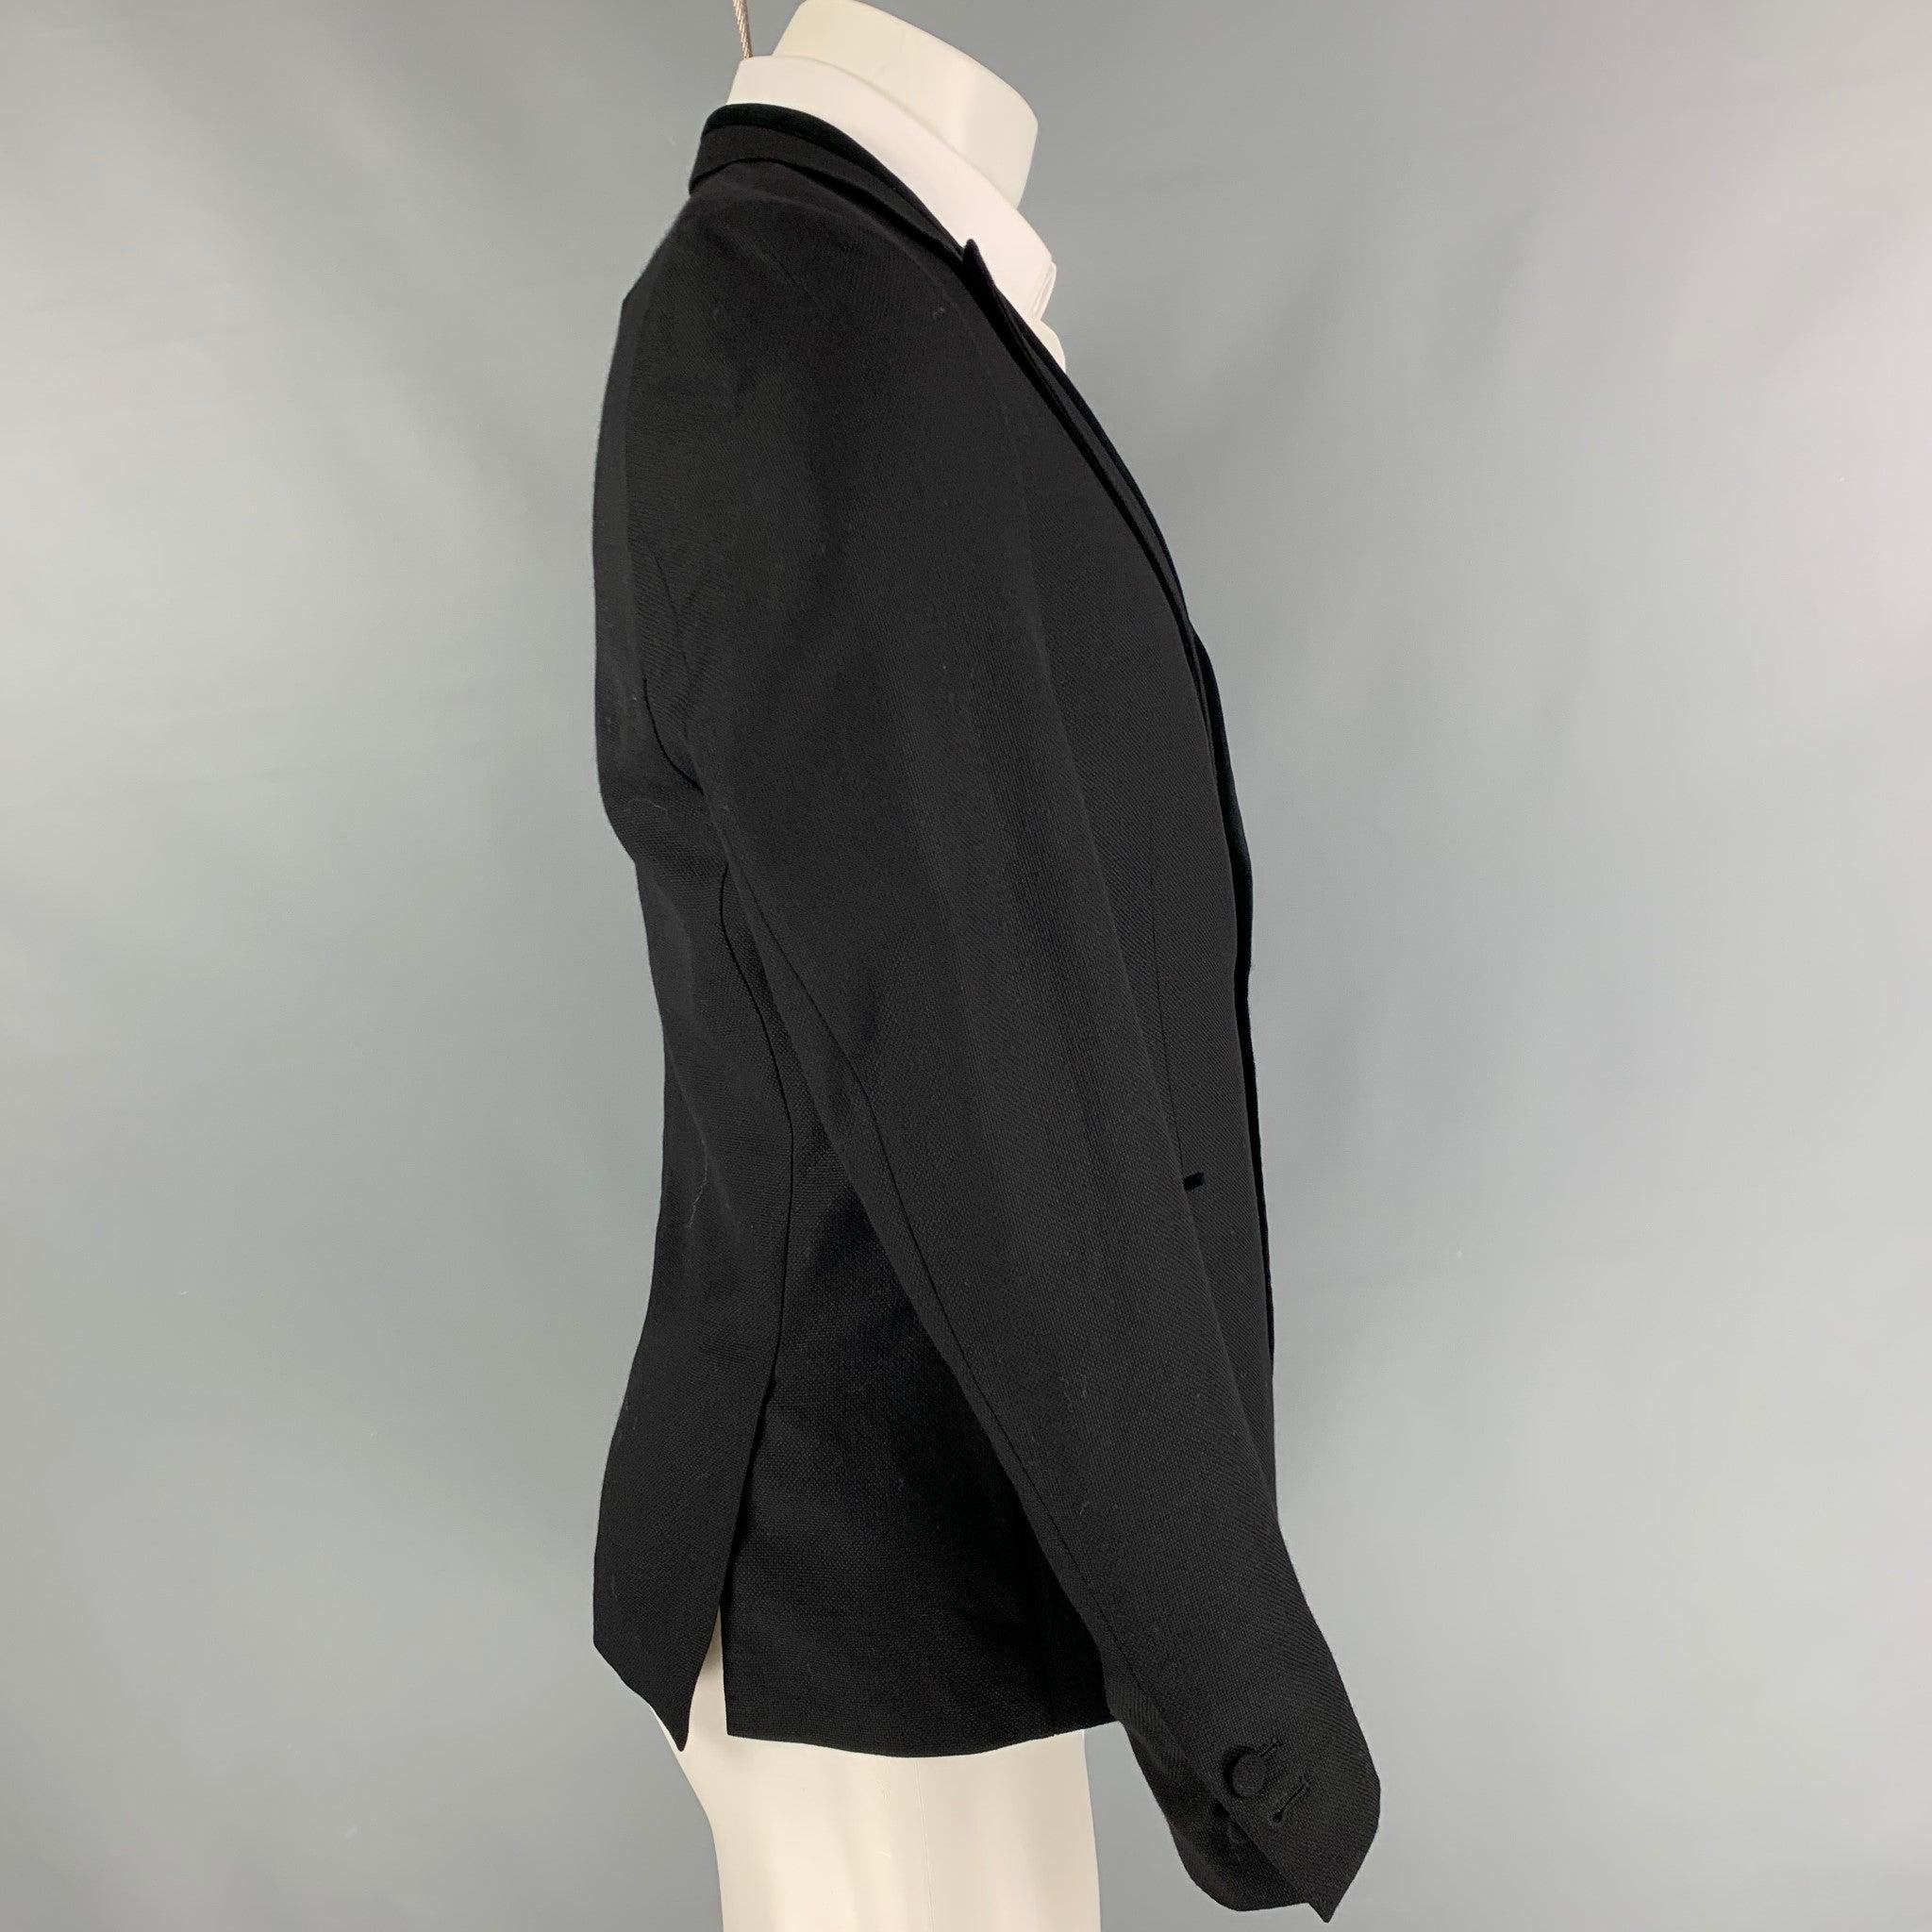 THE KOOPLES Size 38 Black Woven Wool Tuxedo Sport Coat In Good Condition For Sale In San Francisco, CA